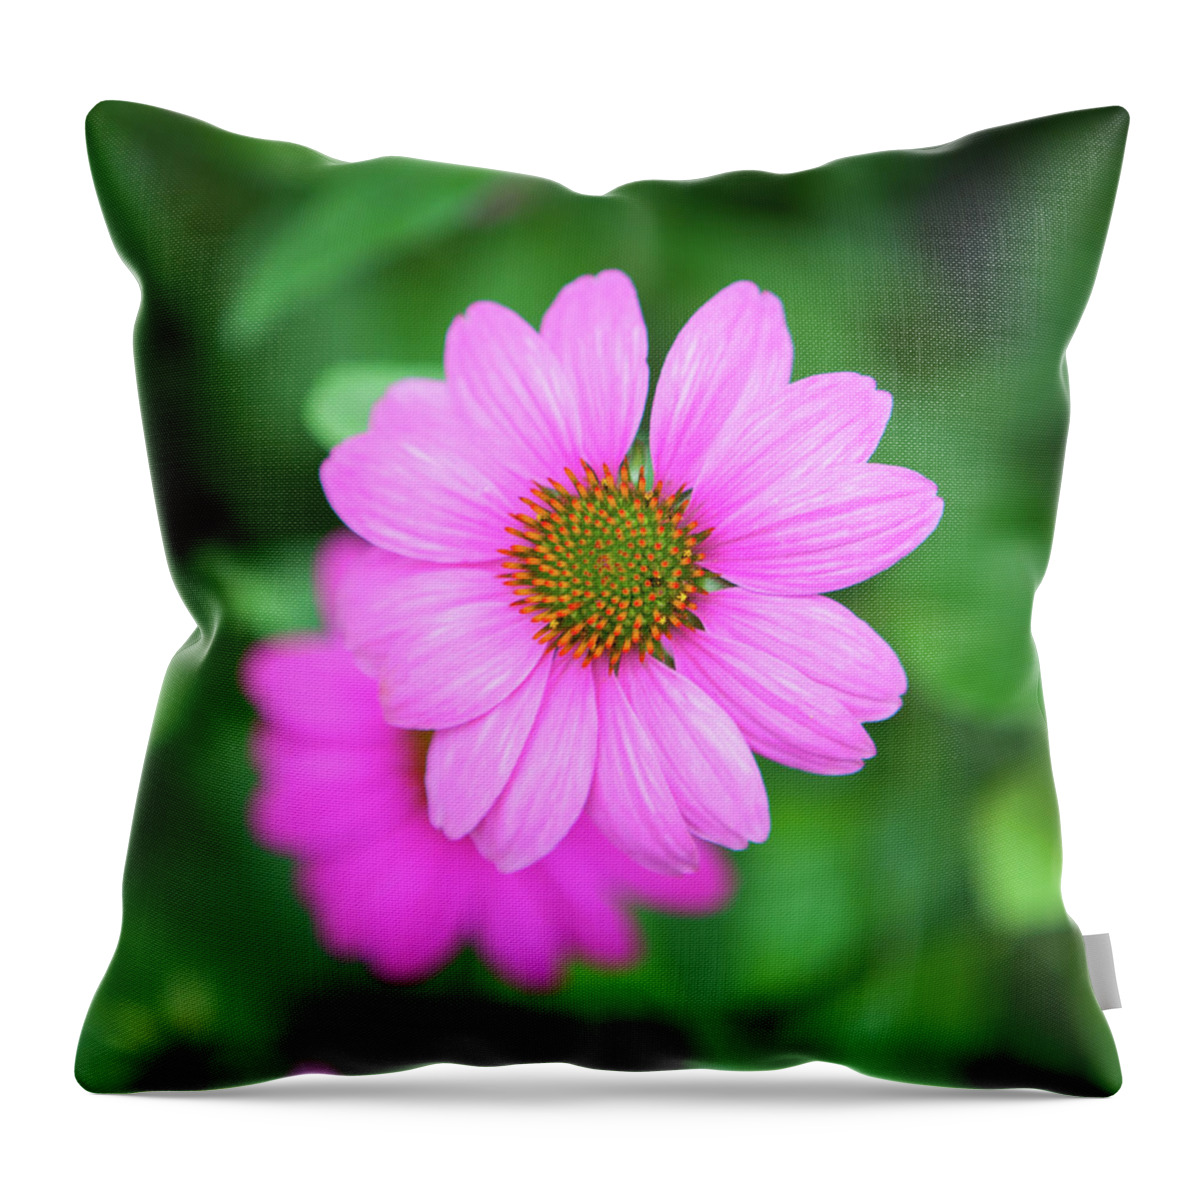 Flowers Throw Pillow featuring the photograph Purple Cone Flower_6125 by Rocco Leone